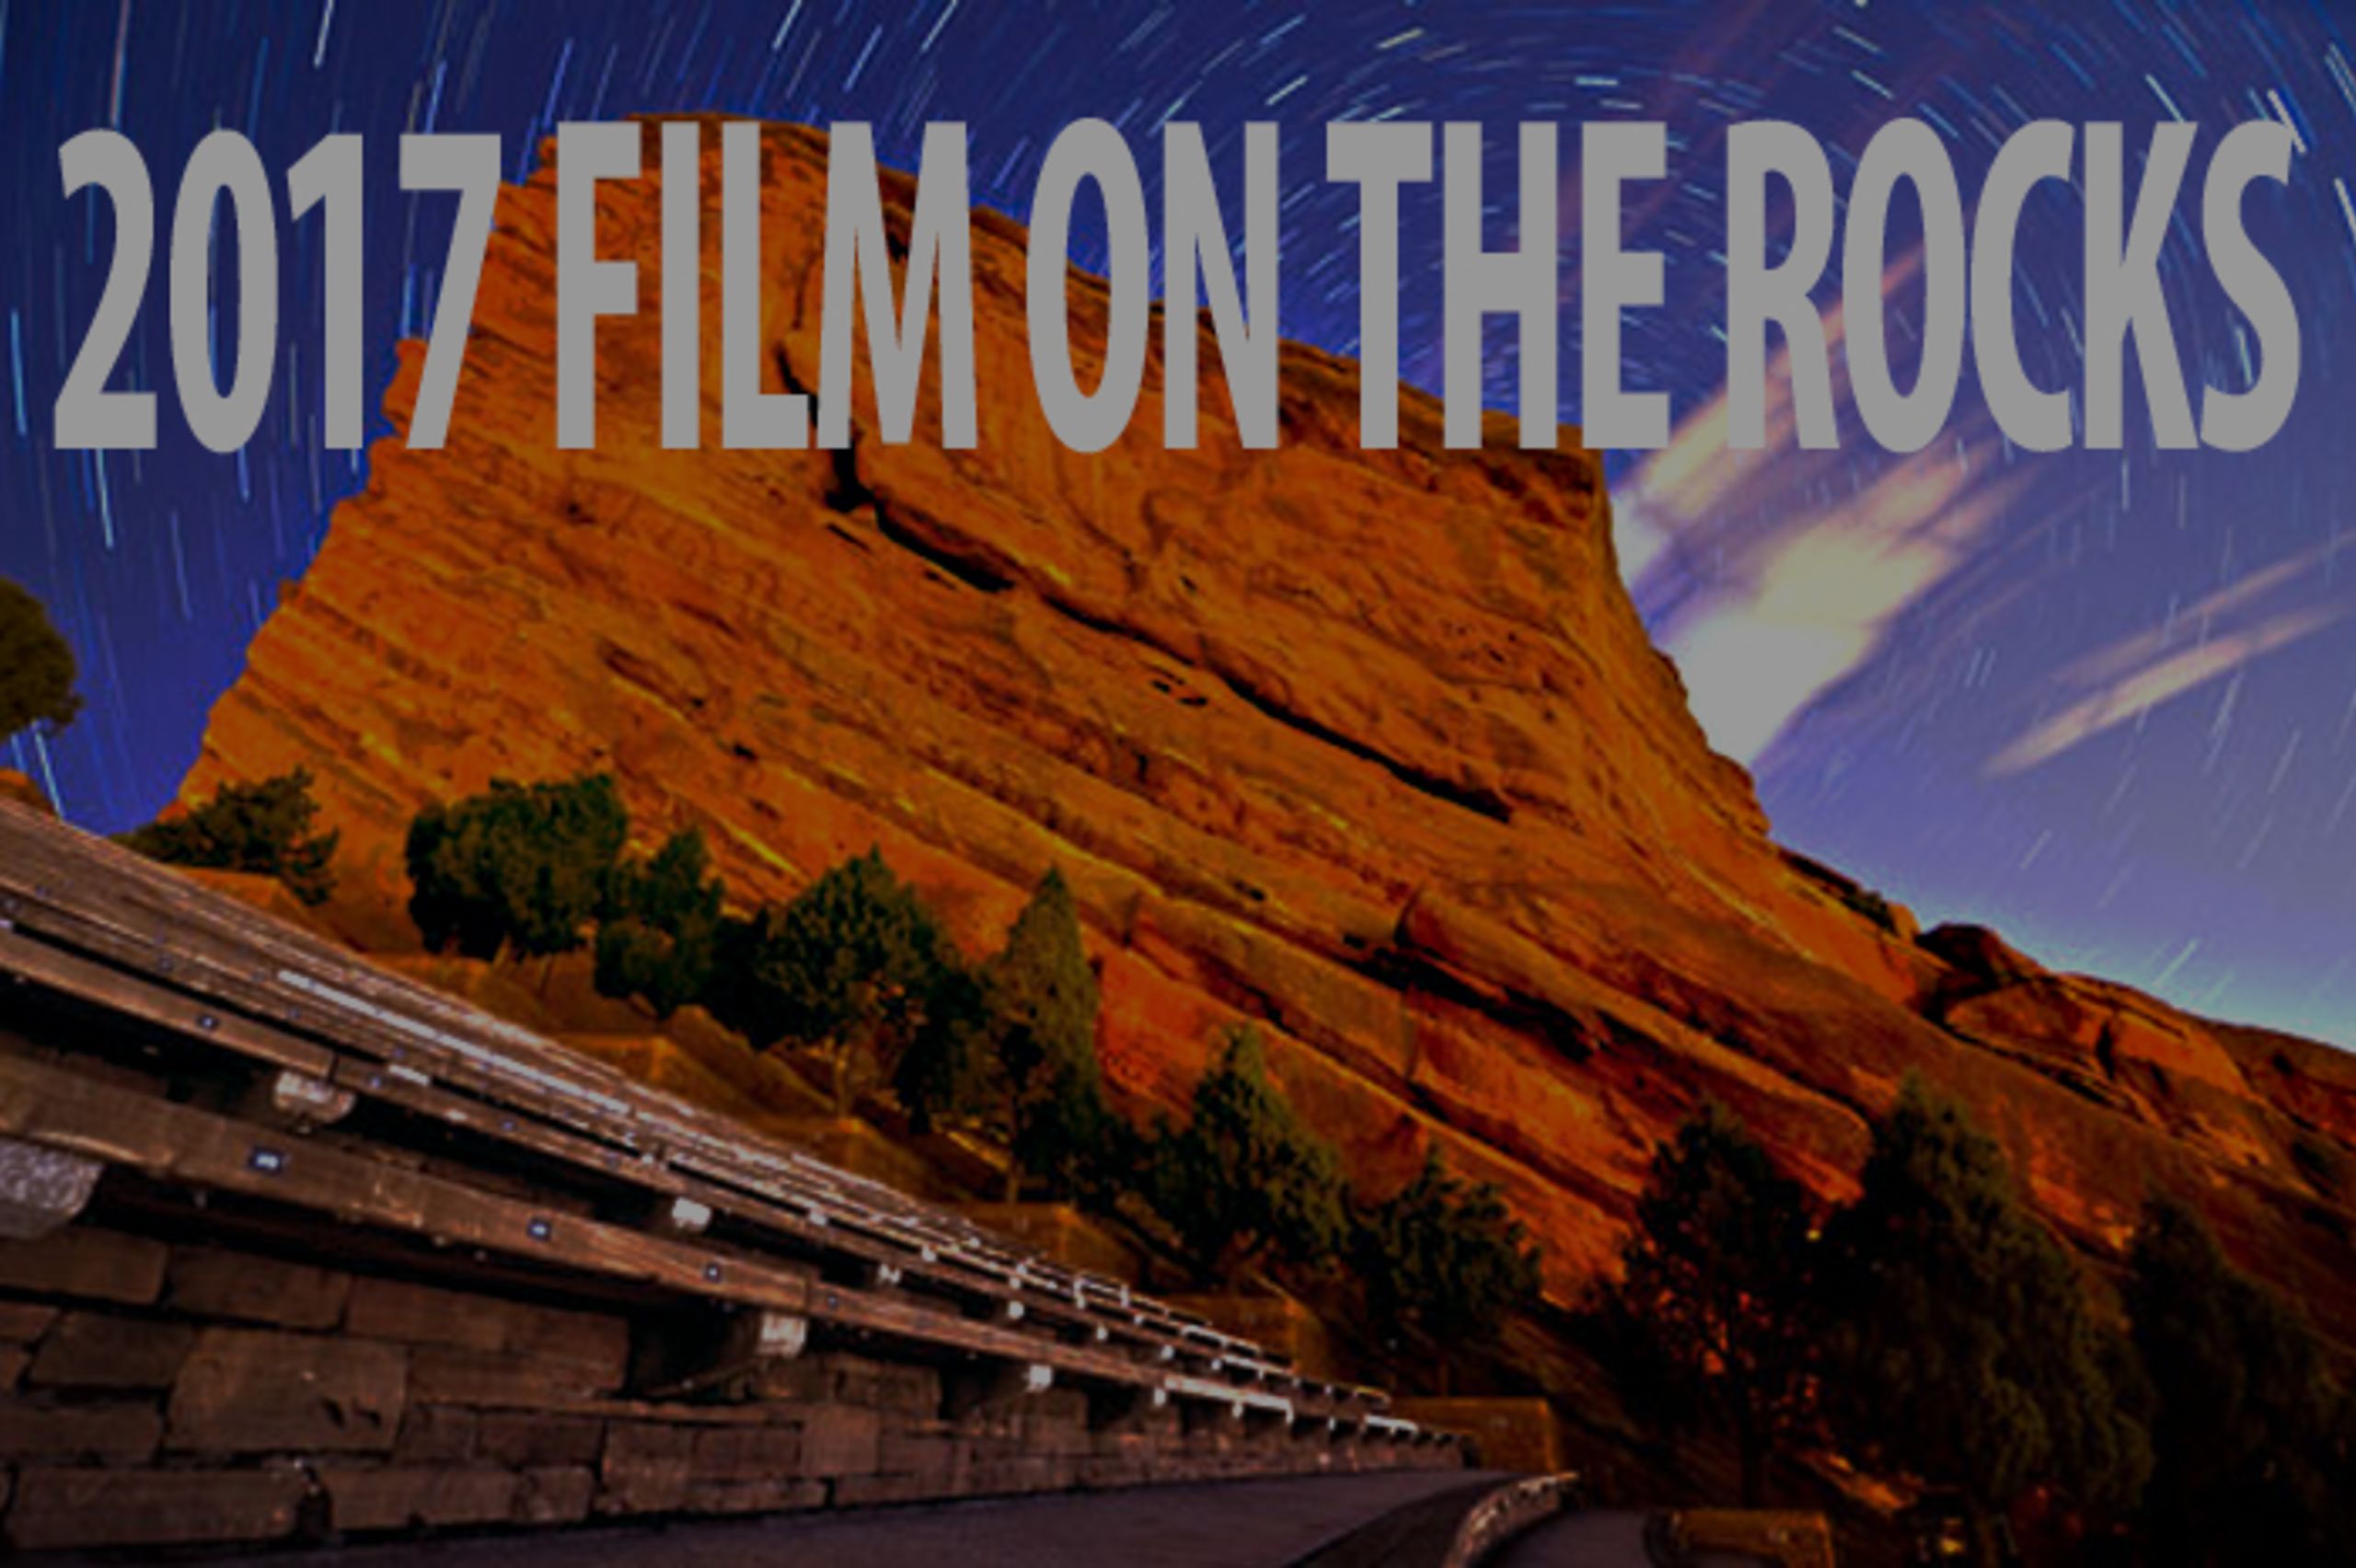 Red Rocks Film on the Rocks Announces 2017 Summer Schedule